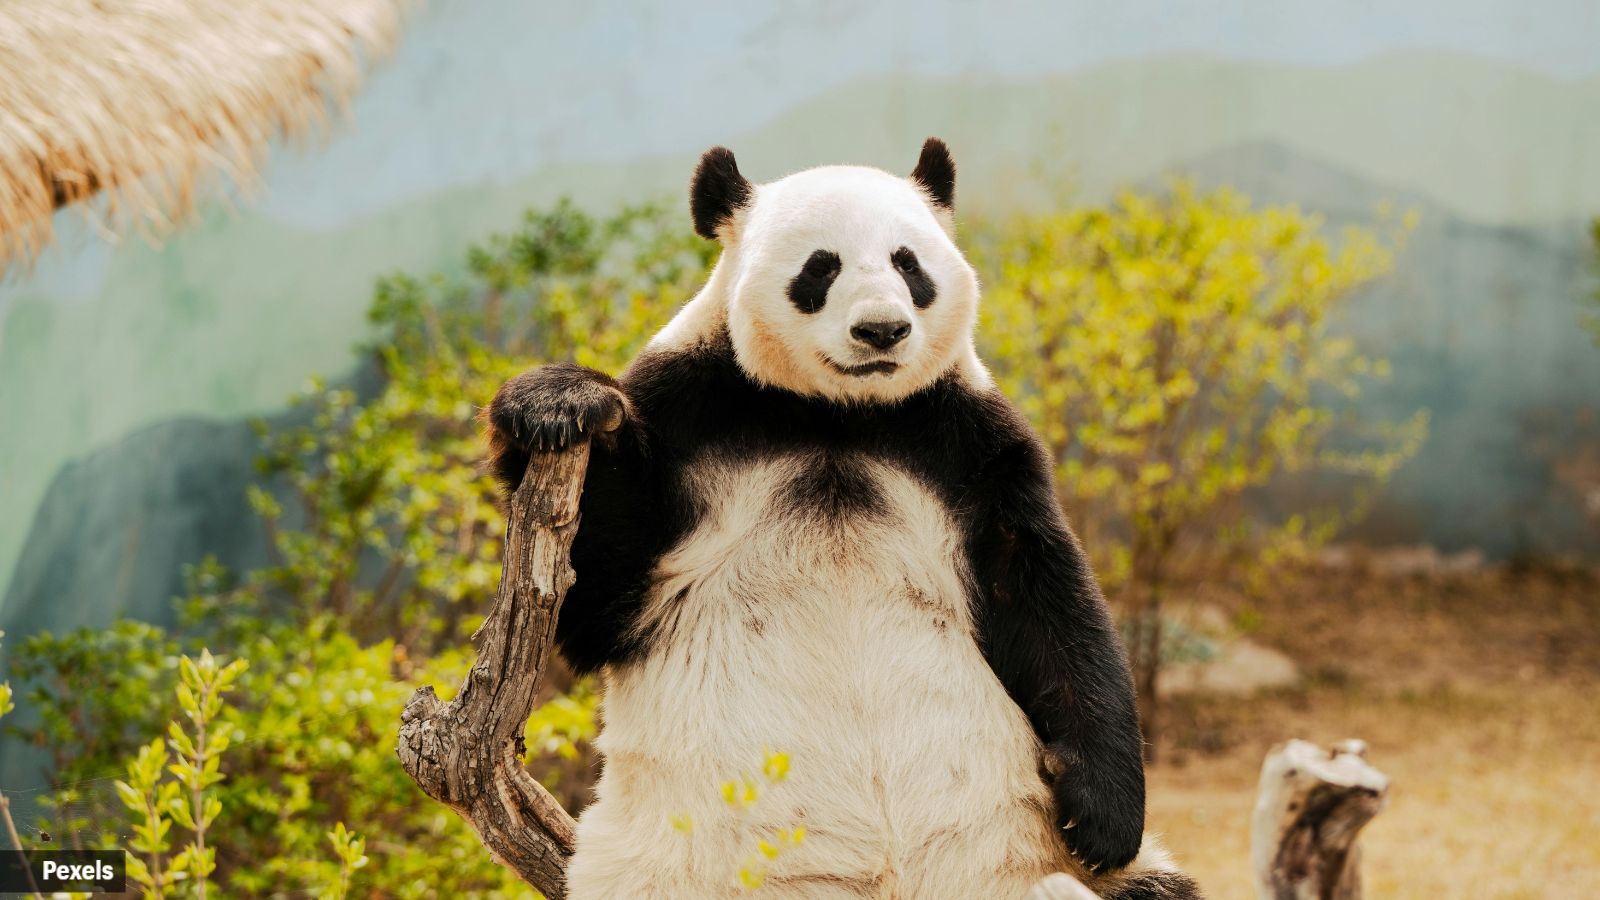 This National Panda Day, here are some interesting facts about the